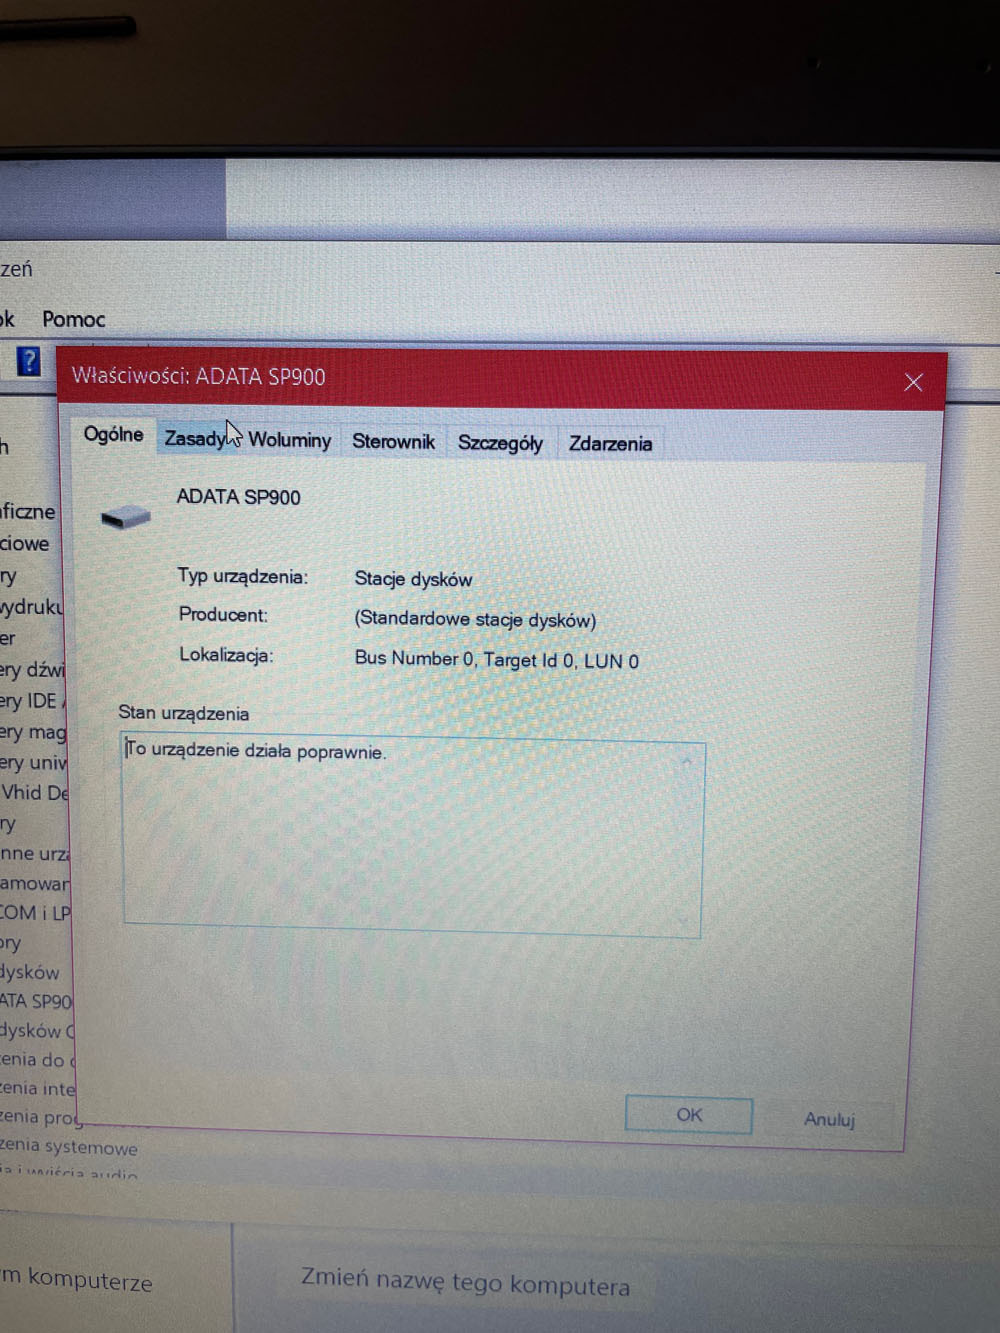 SSD-sometimes-not-detected-in-BIOS-and-Windows-10-cannot-boot - English  Community - LENOVO COMMUNITY